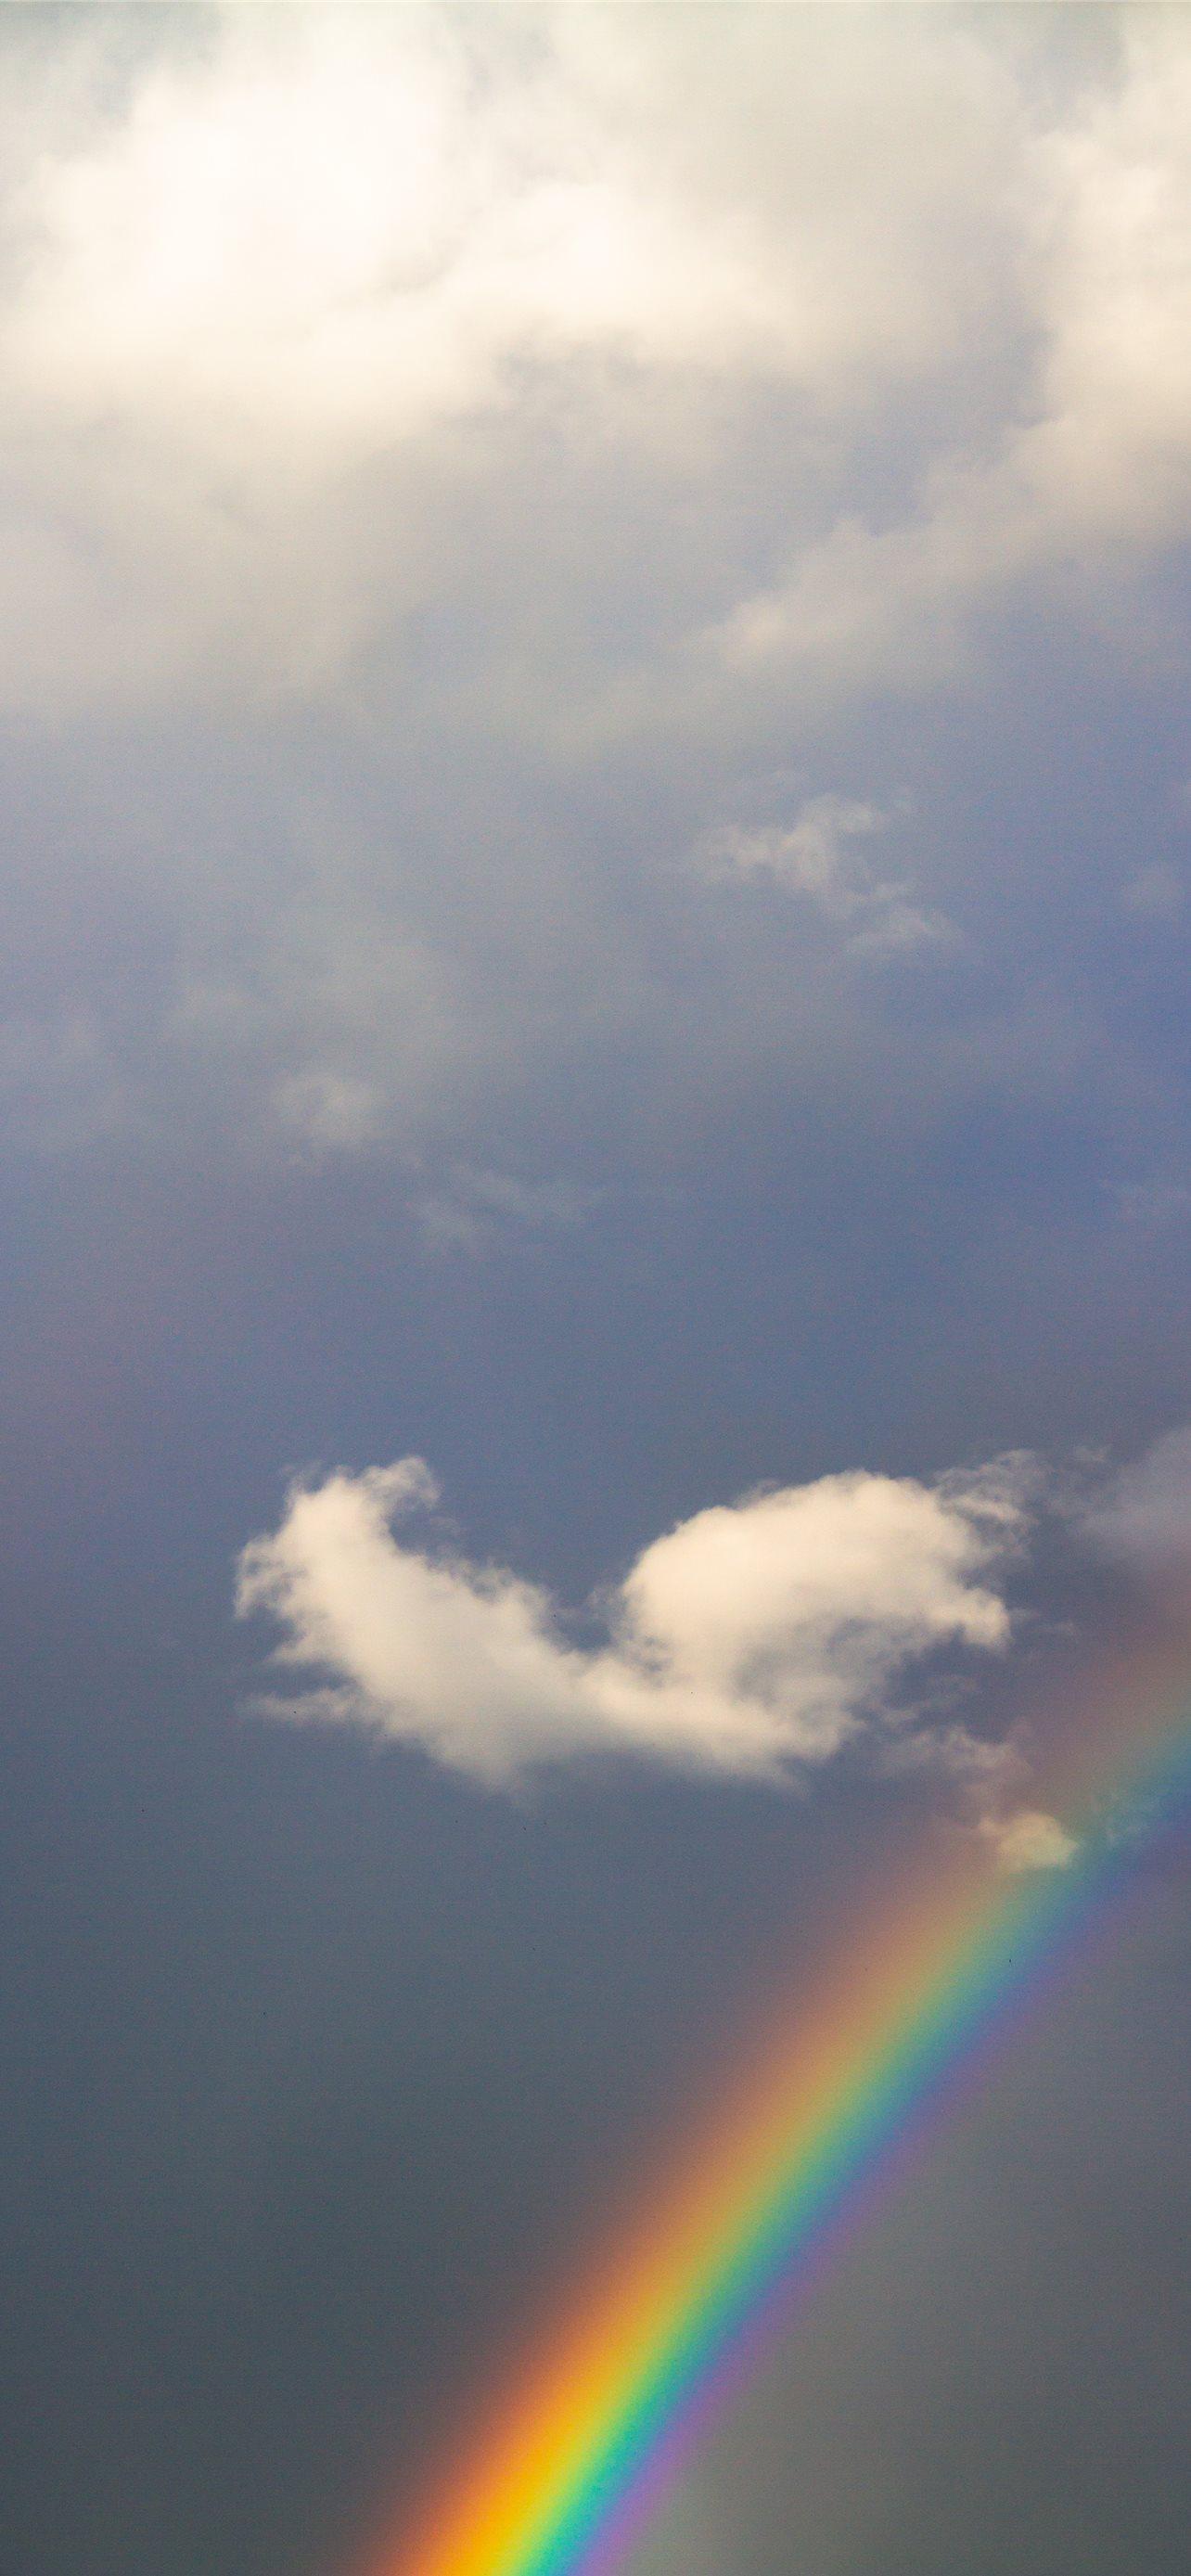 Rainbow And Clouds iPhone Wallpaper